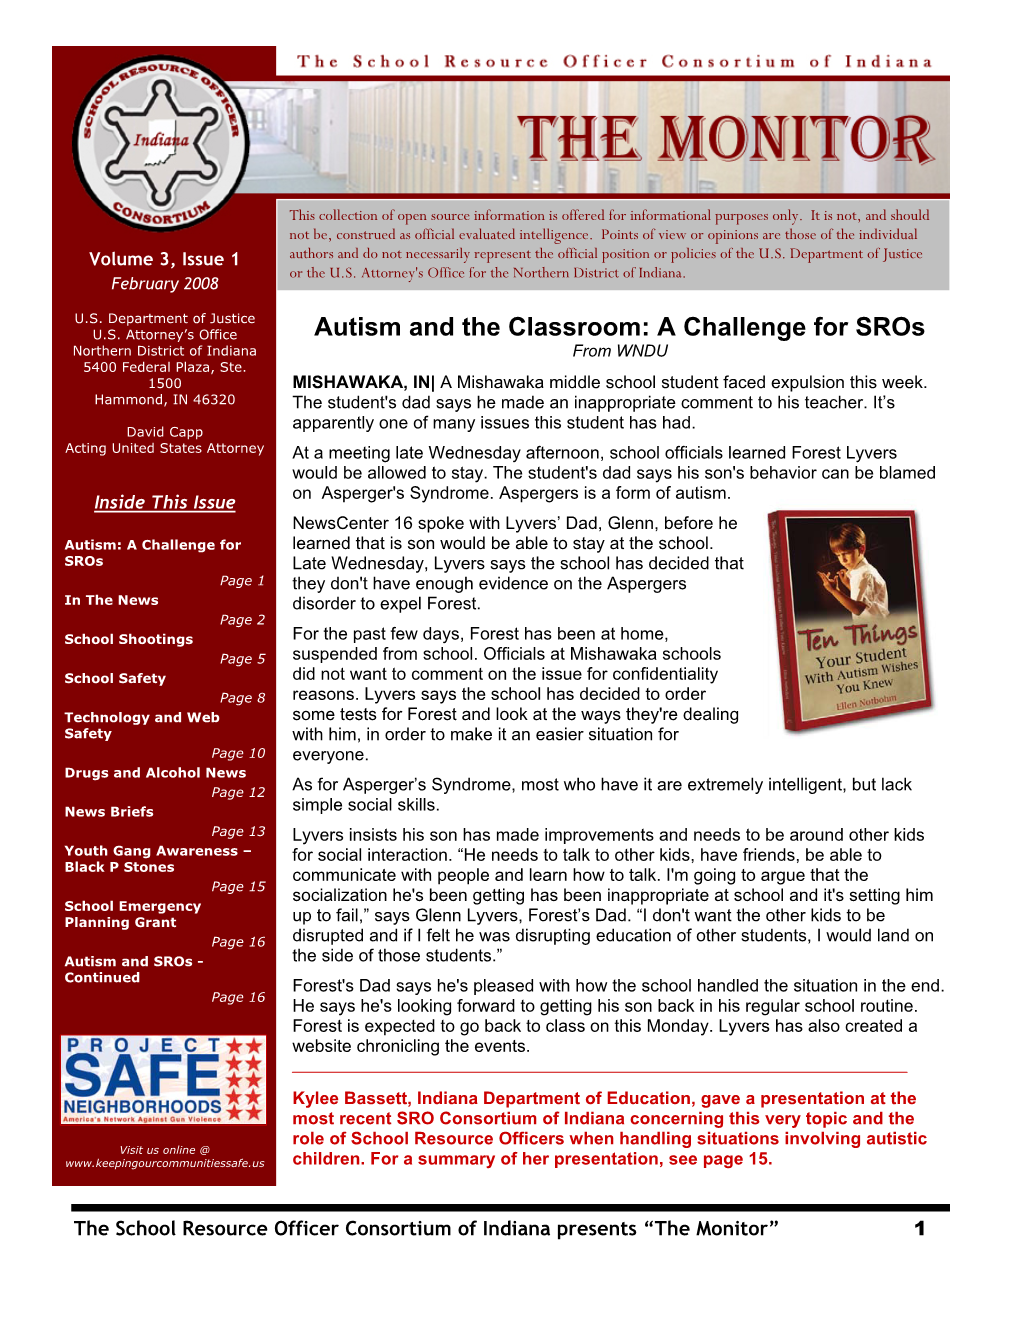 Autism and the Classroom: a Challenge for Sros Northern District of Indiana from WNDU 5400 Federal Plaza, Ste